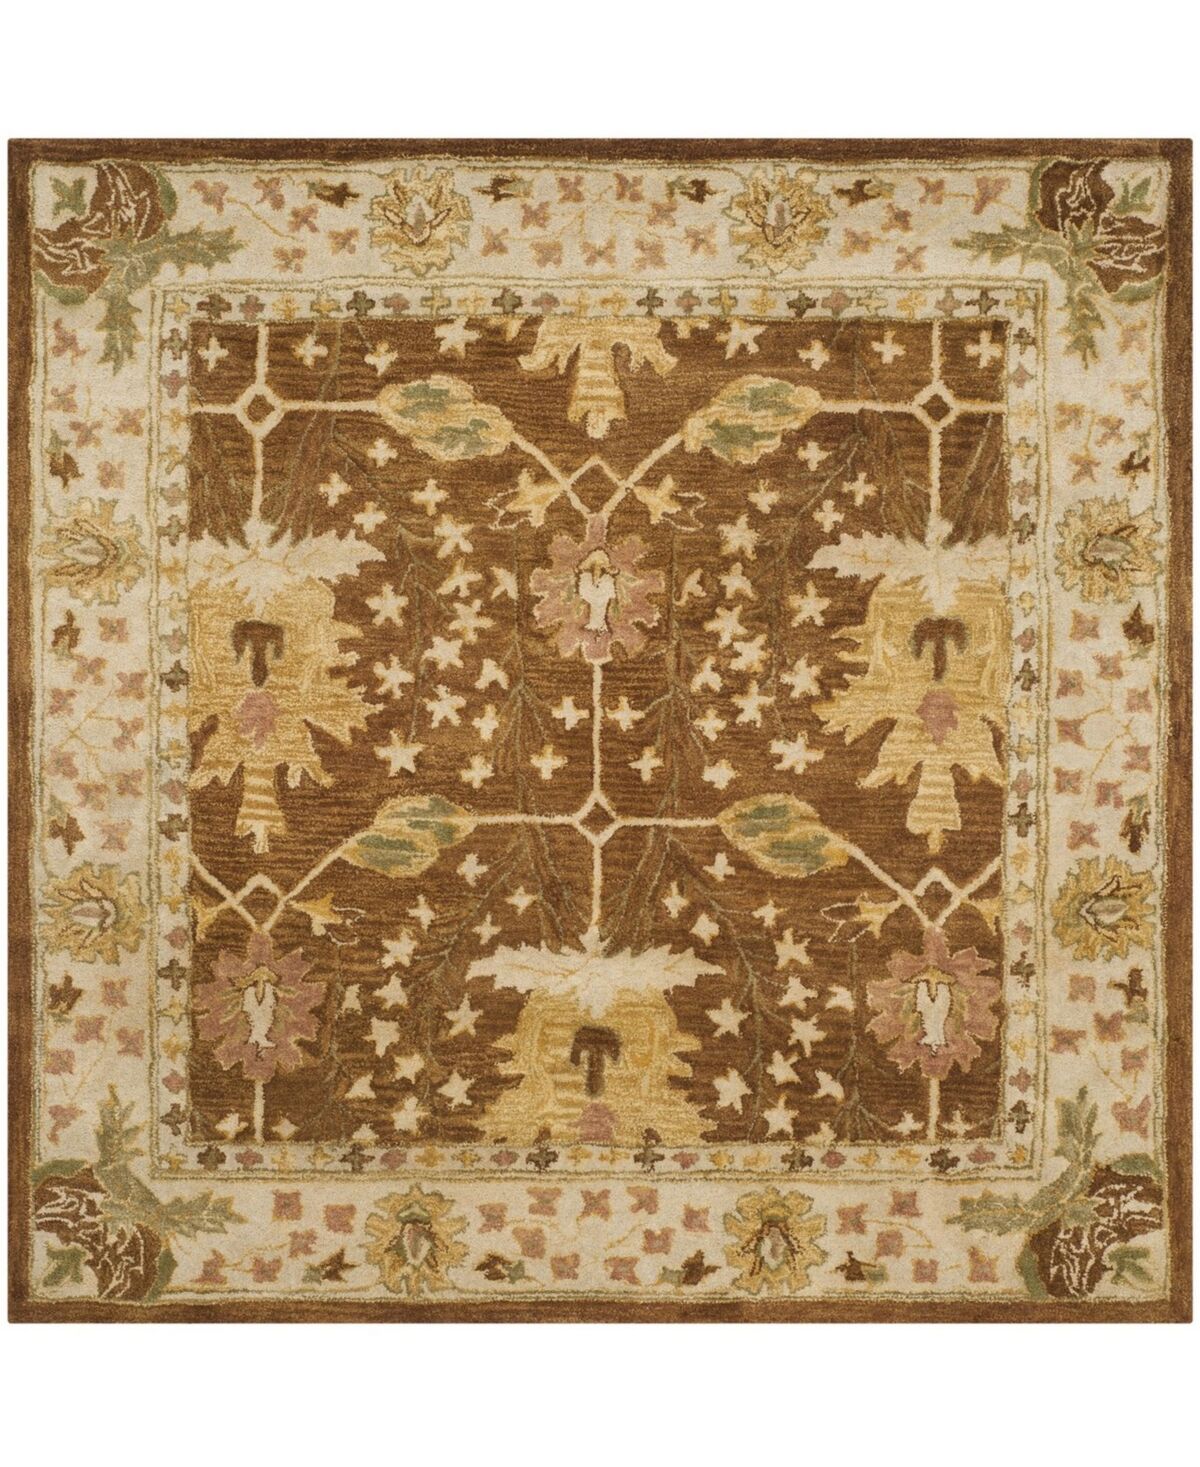 Safavieh Antiquity At840 Brown 6' x 6' Square Area Rug - Brown